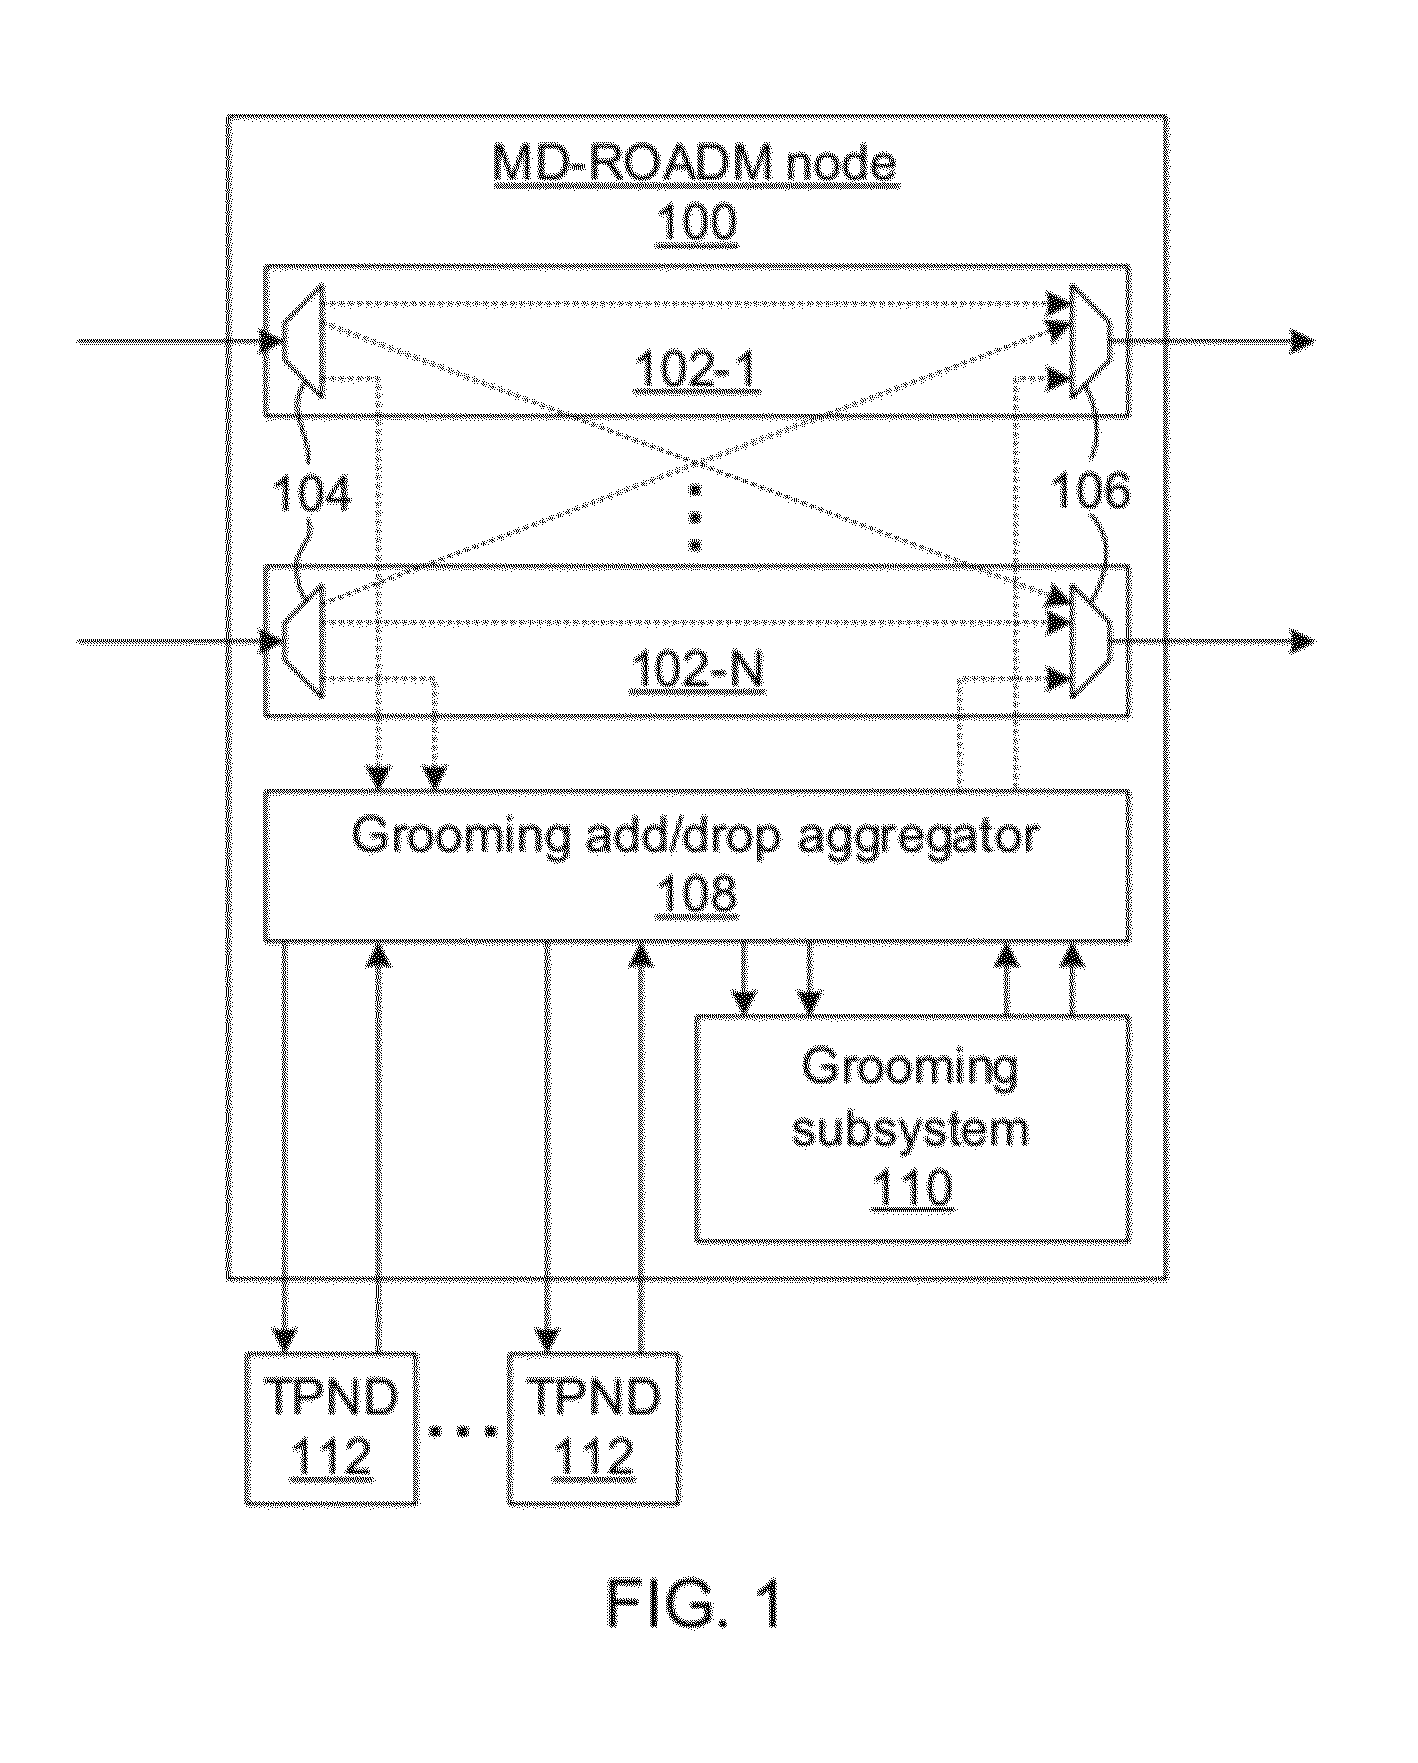 Optical-layer traffic grooming at an OFDM subcarrier level with photodetection conversion of an input optical OFDM to an electrical signal